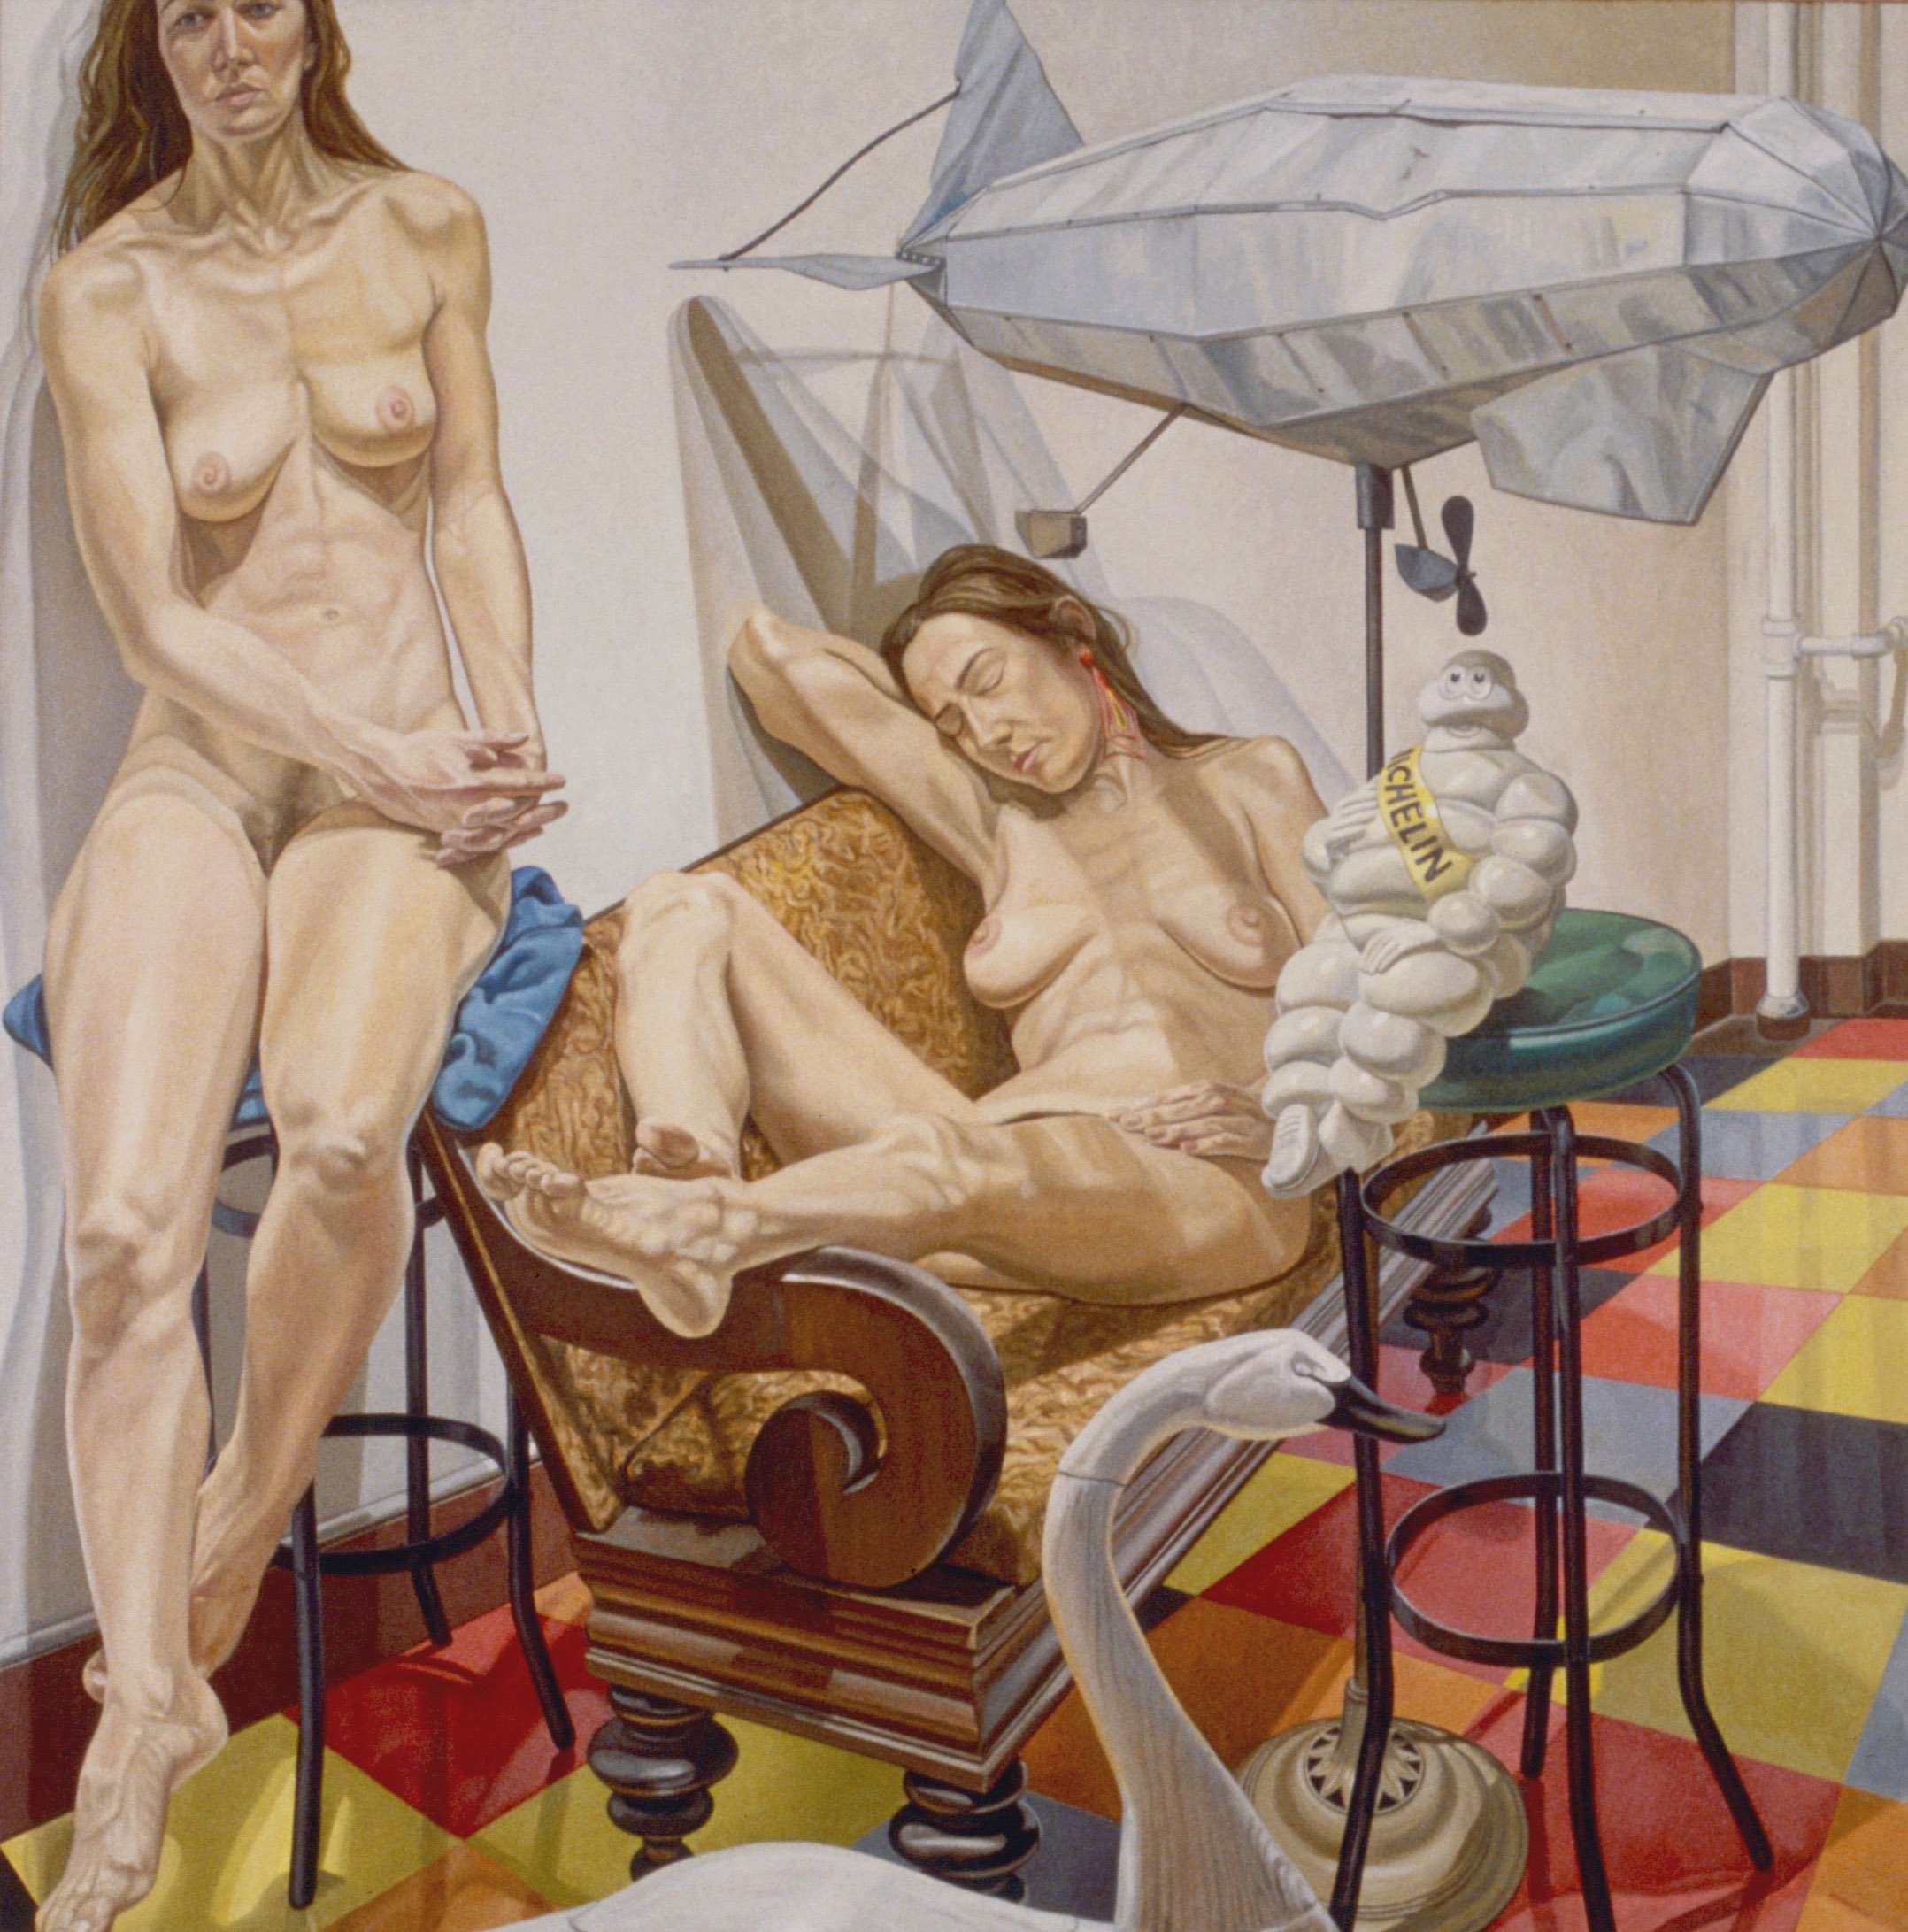 Philip Pearlstein, Models and Blimp, 1991, Oil on canvas 84 x 84 in. (213.4 x 213.4 cm)